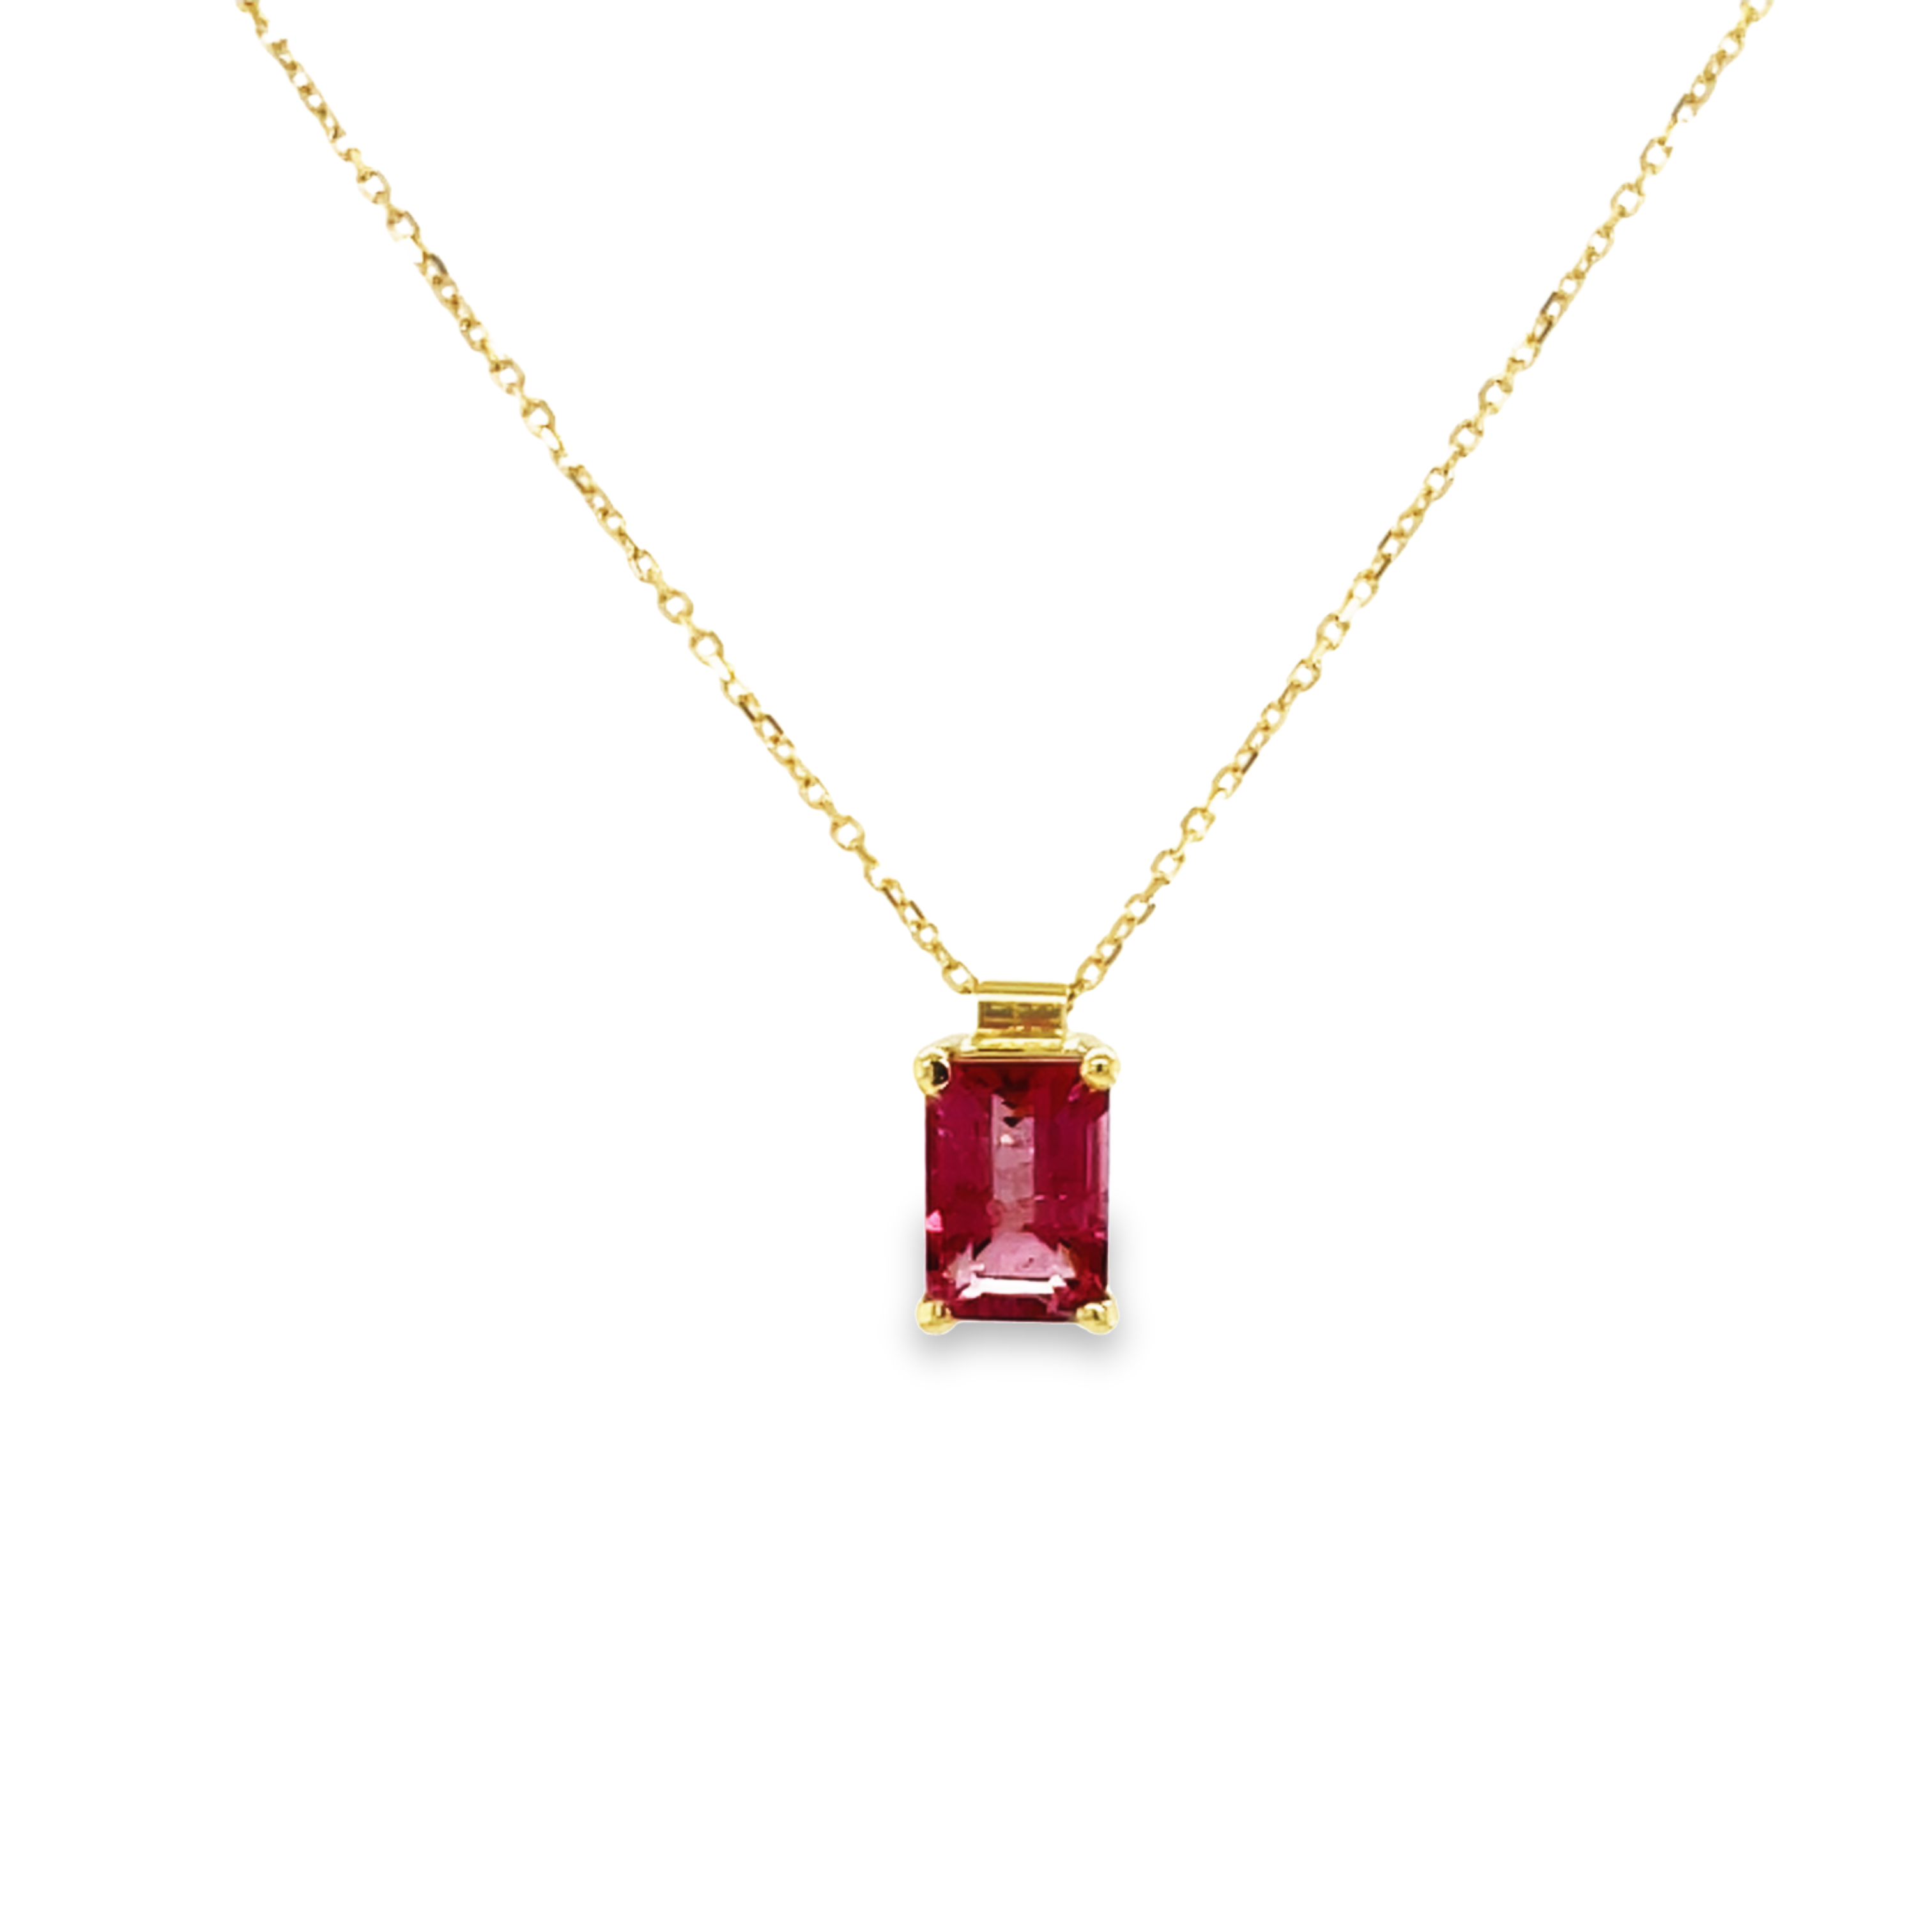 Beautifully crafted in 18k white and yellow gold, this stunning 0.40 cts pink tourmaline baguette cut pendant sparkles with a 8.00 x 5.00 mm gemstone (including bail) and an 18" chain.